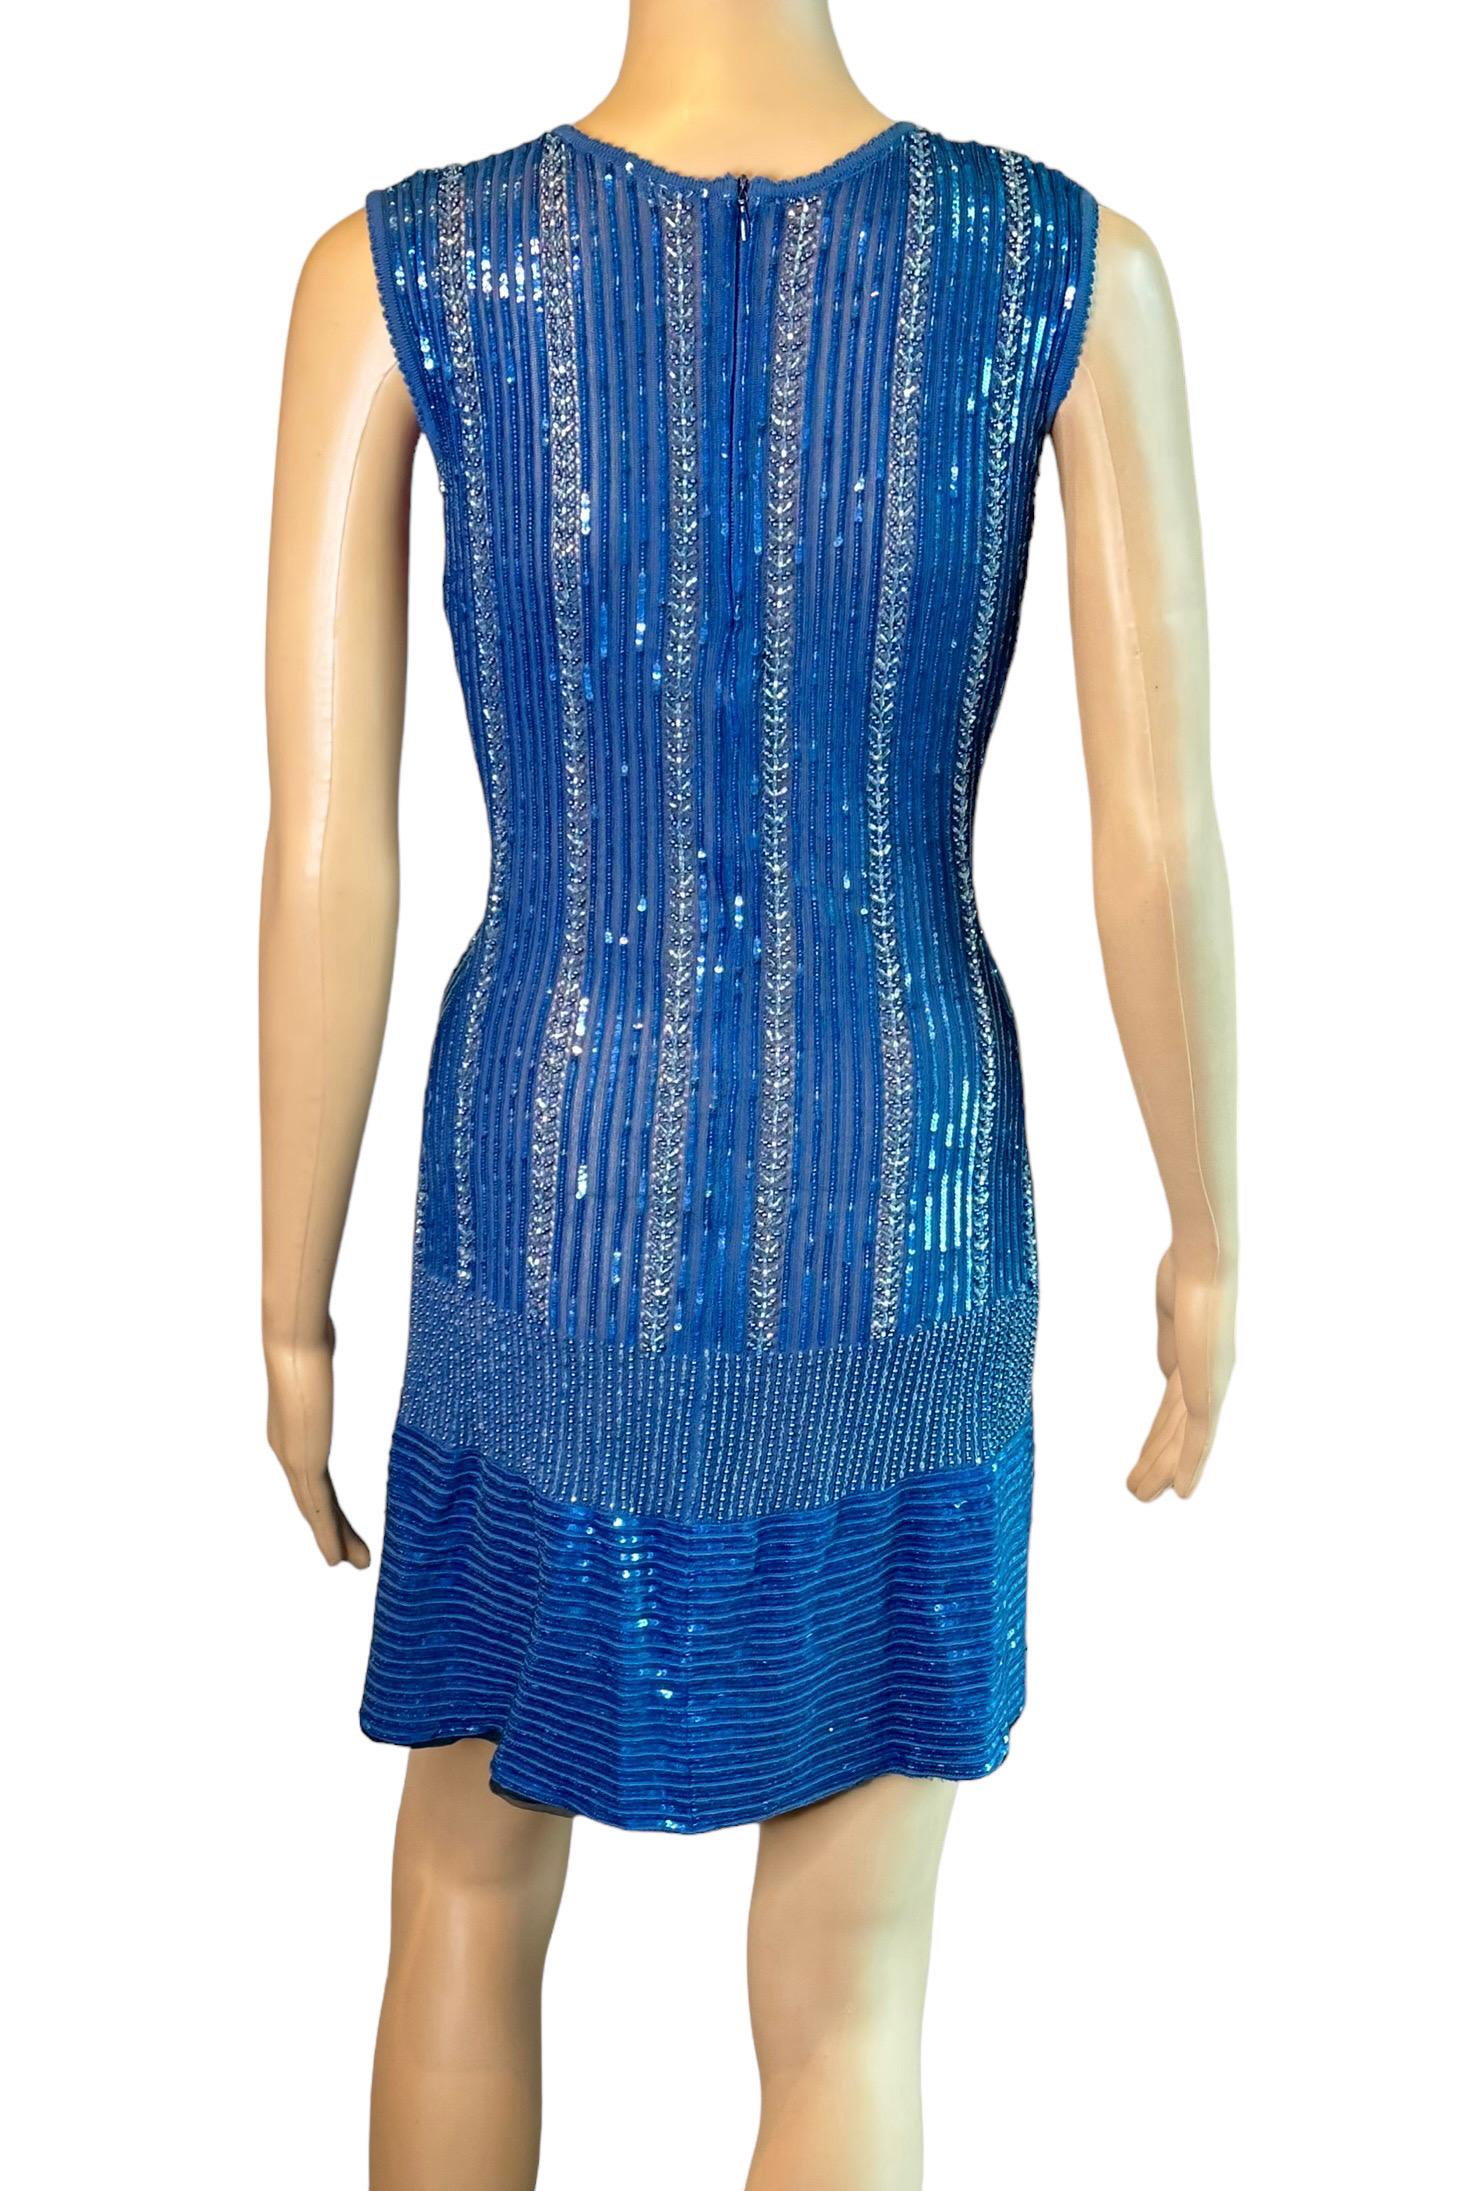 Azzedine Alaia Vintage S/S 1996 Runway Sequin Embellished Blue Mini Dress In Excellent Condition For Sale In Naples, FL